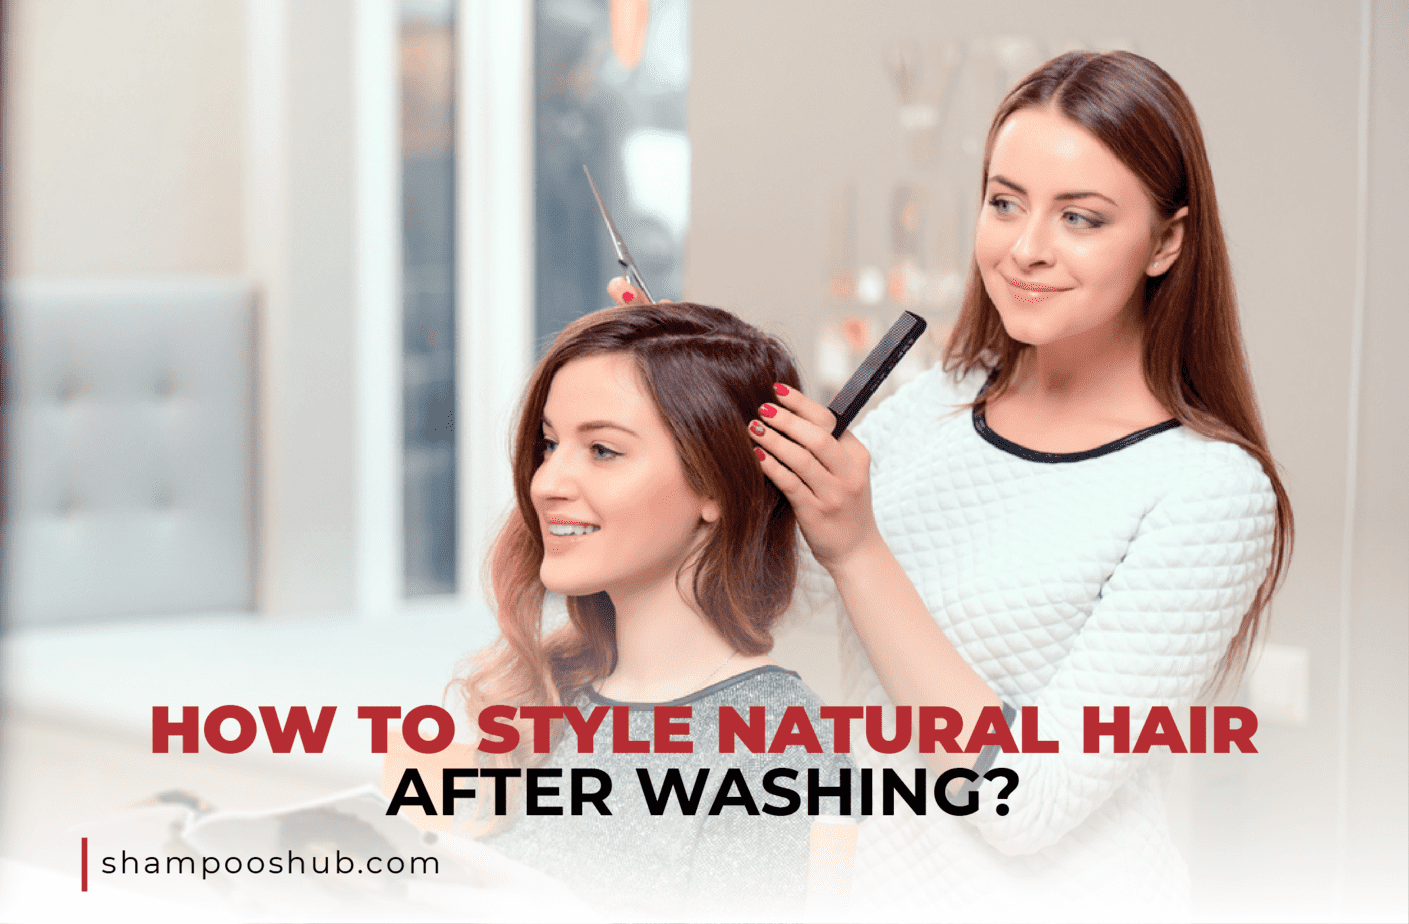 How To Style Natural Hair After Washing?